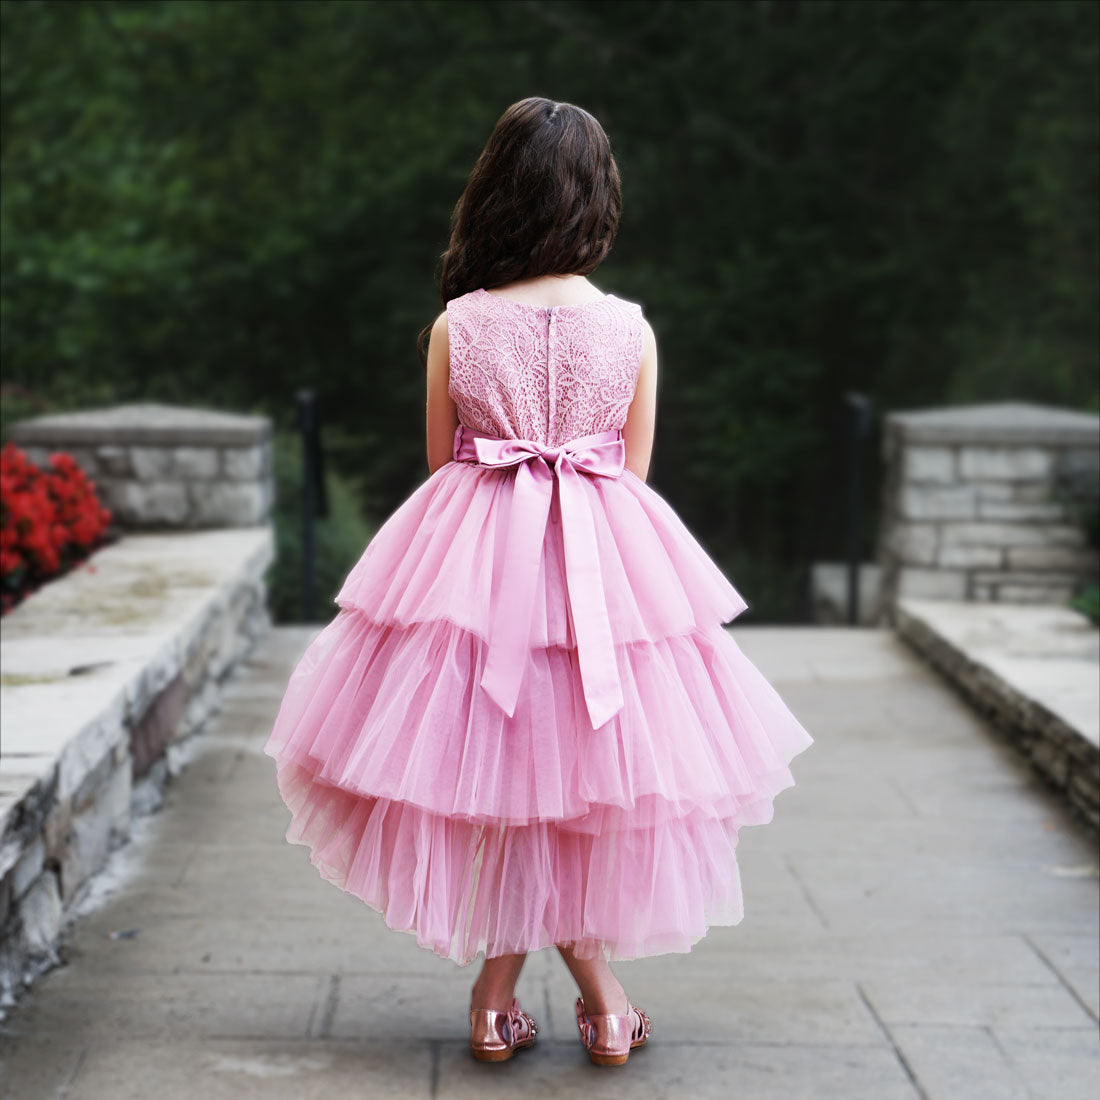 Delicate Cloud Dress for Flower Girls. Pink Dress in Tulle